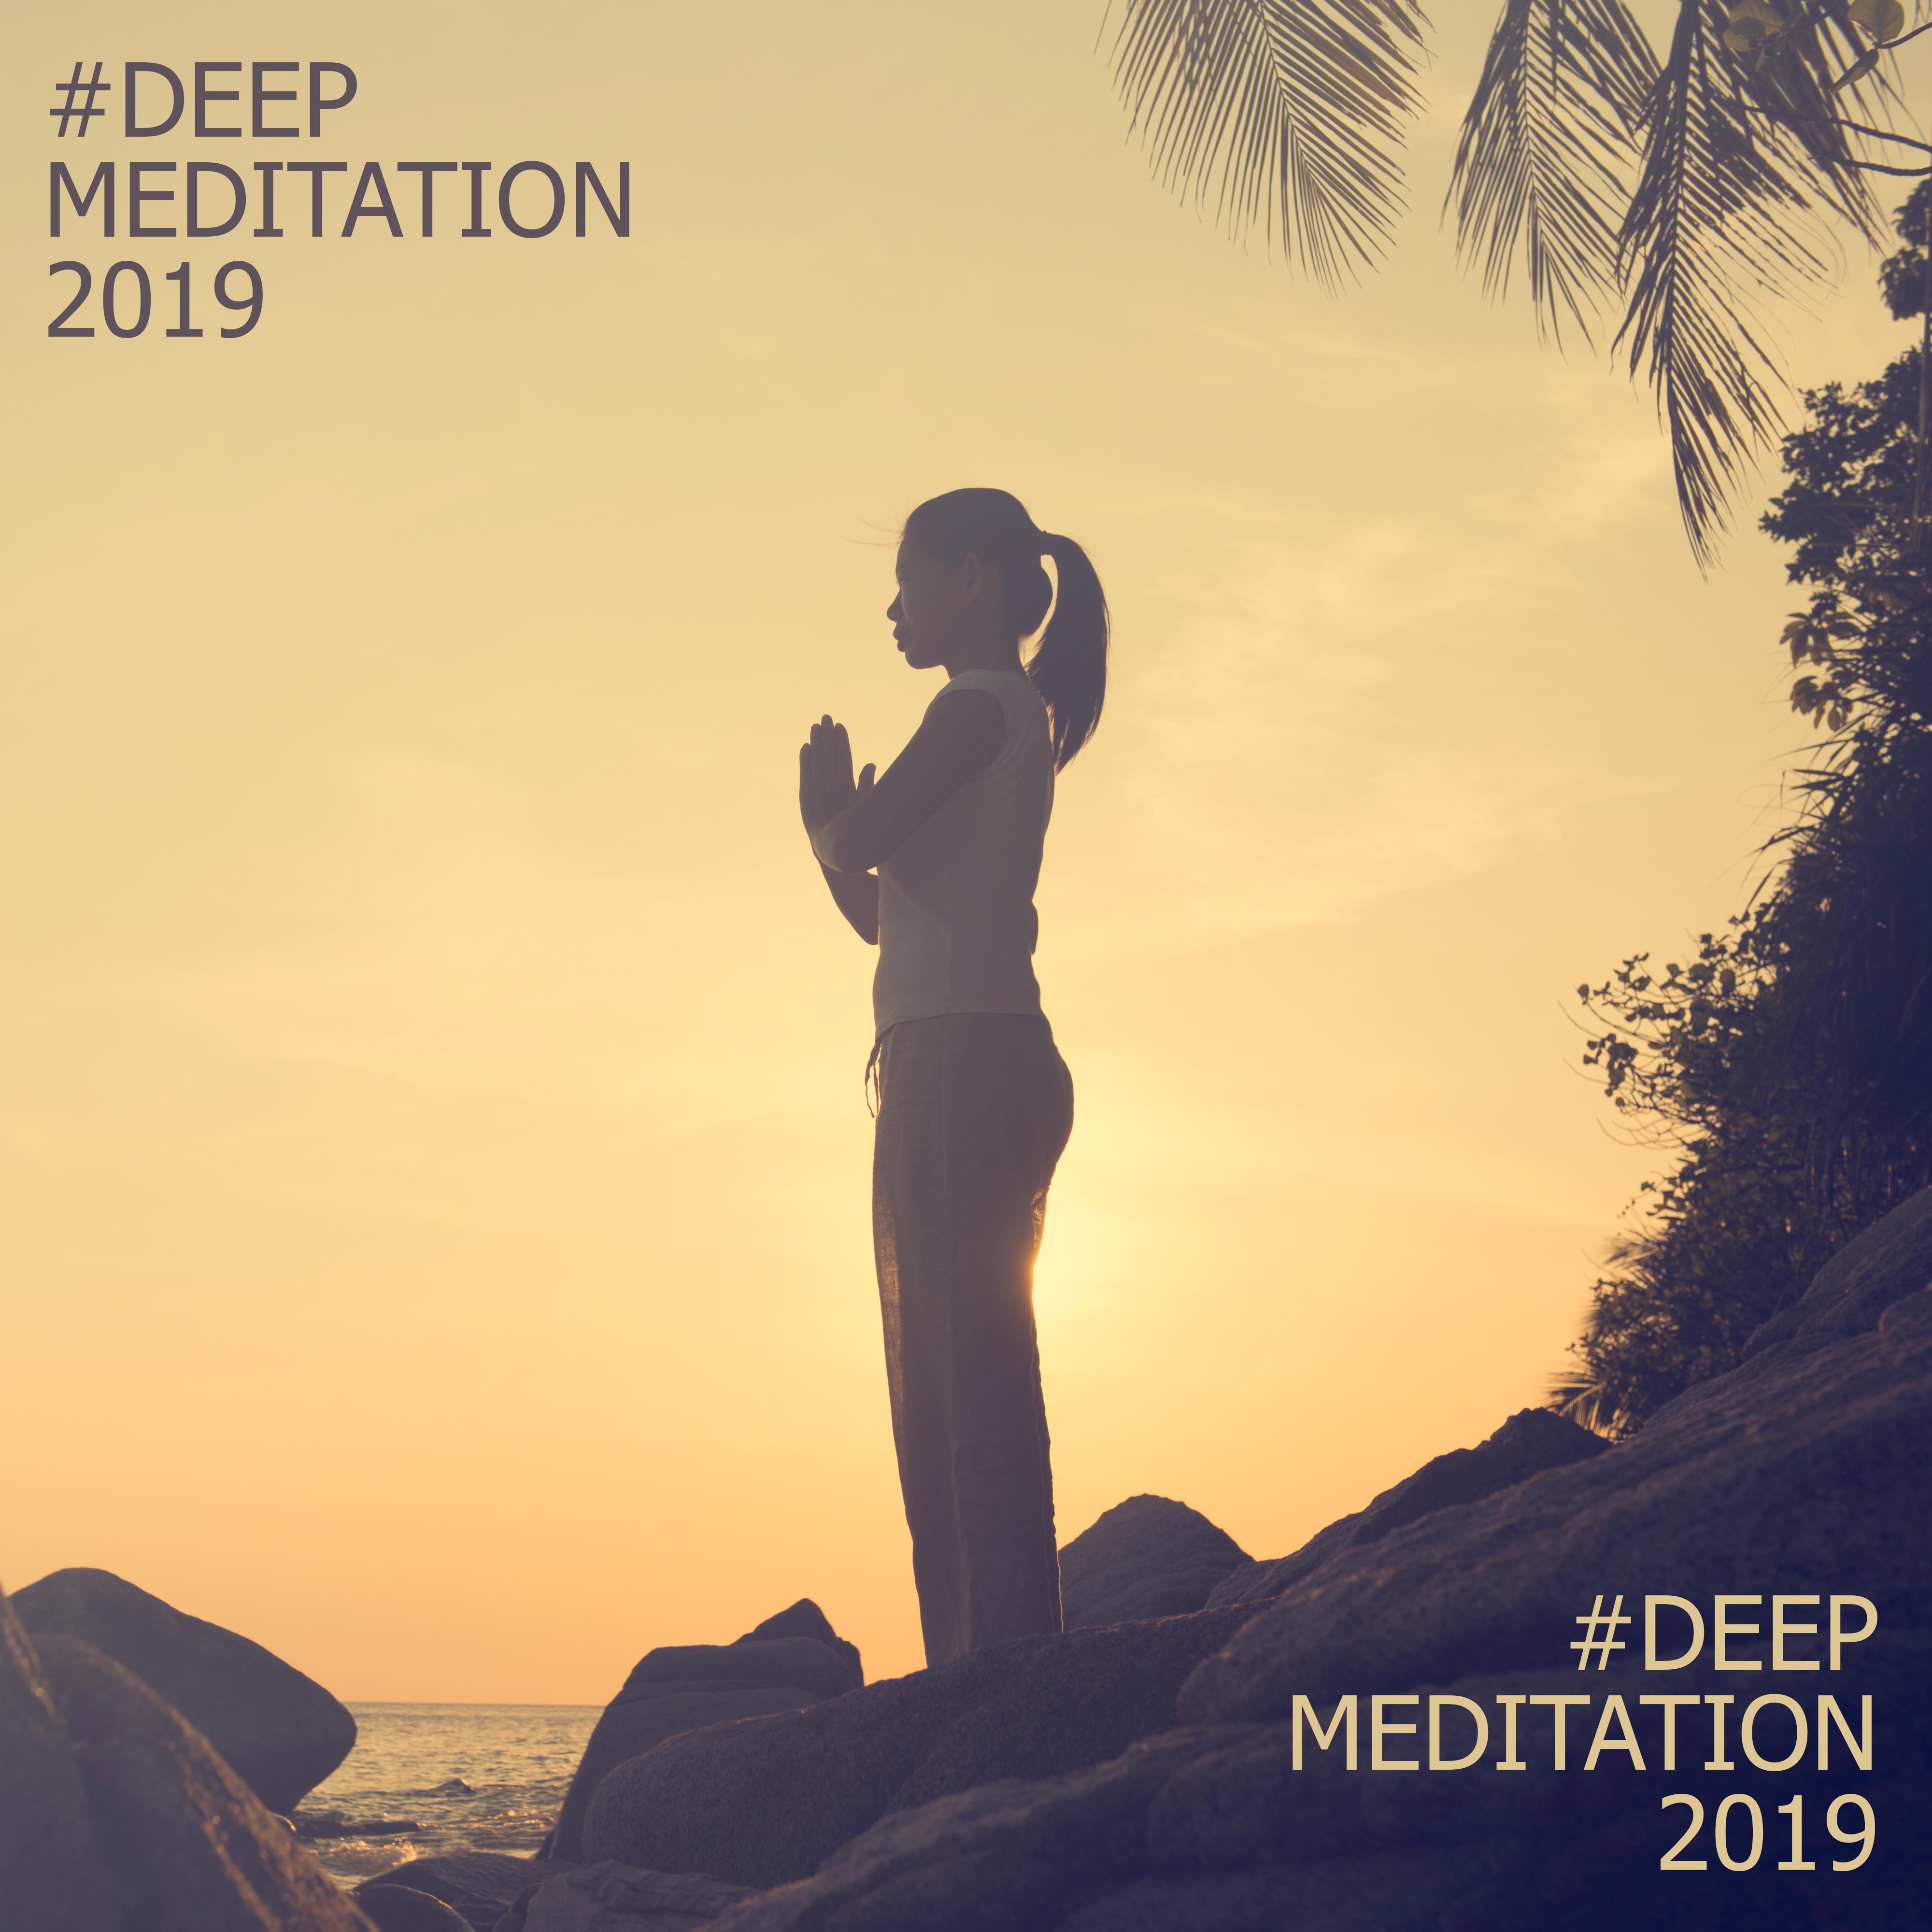 #Deep Meditation 2019 – Meditation Music Zone, Yoga Chill, Inner Harmony, Meditation Therapy, Calming Songs for Full Concentration